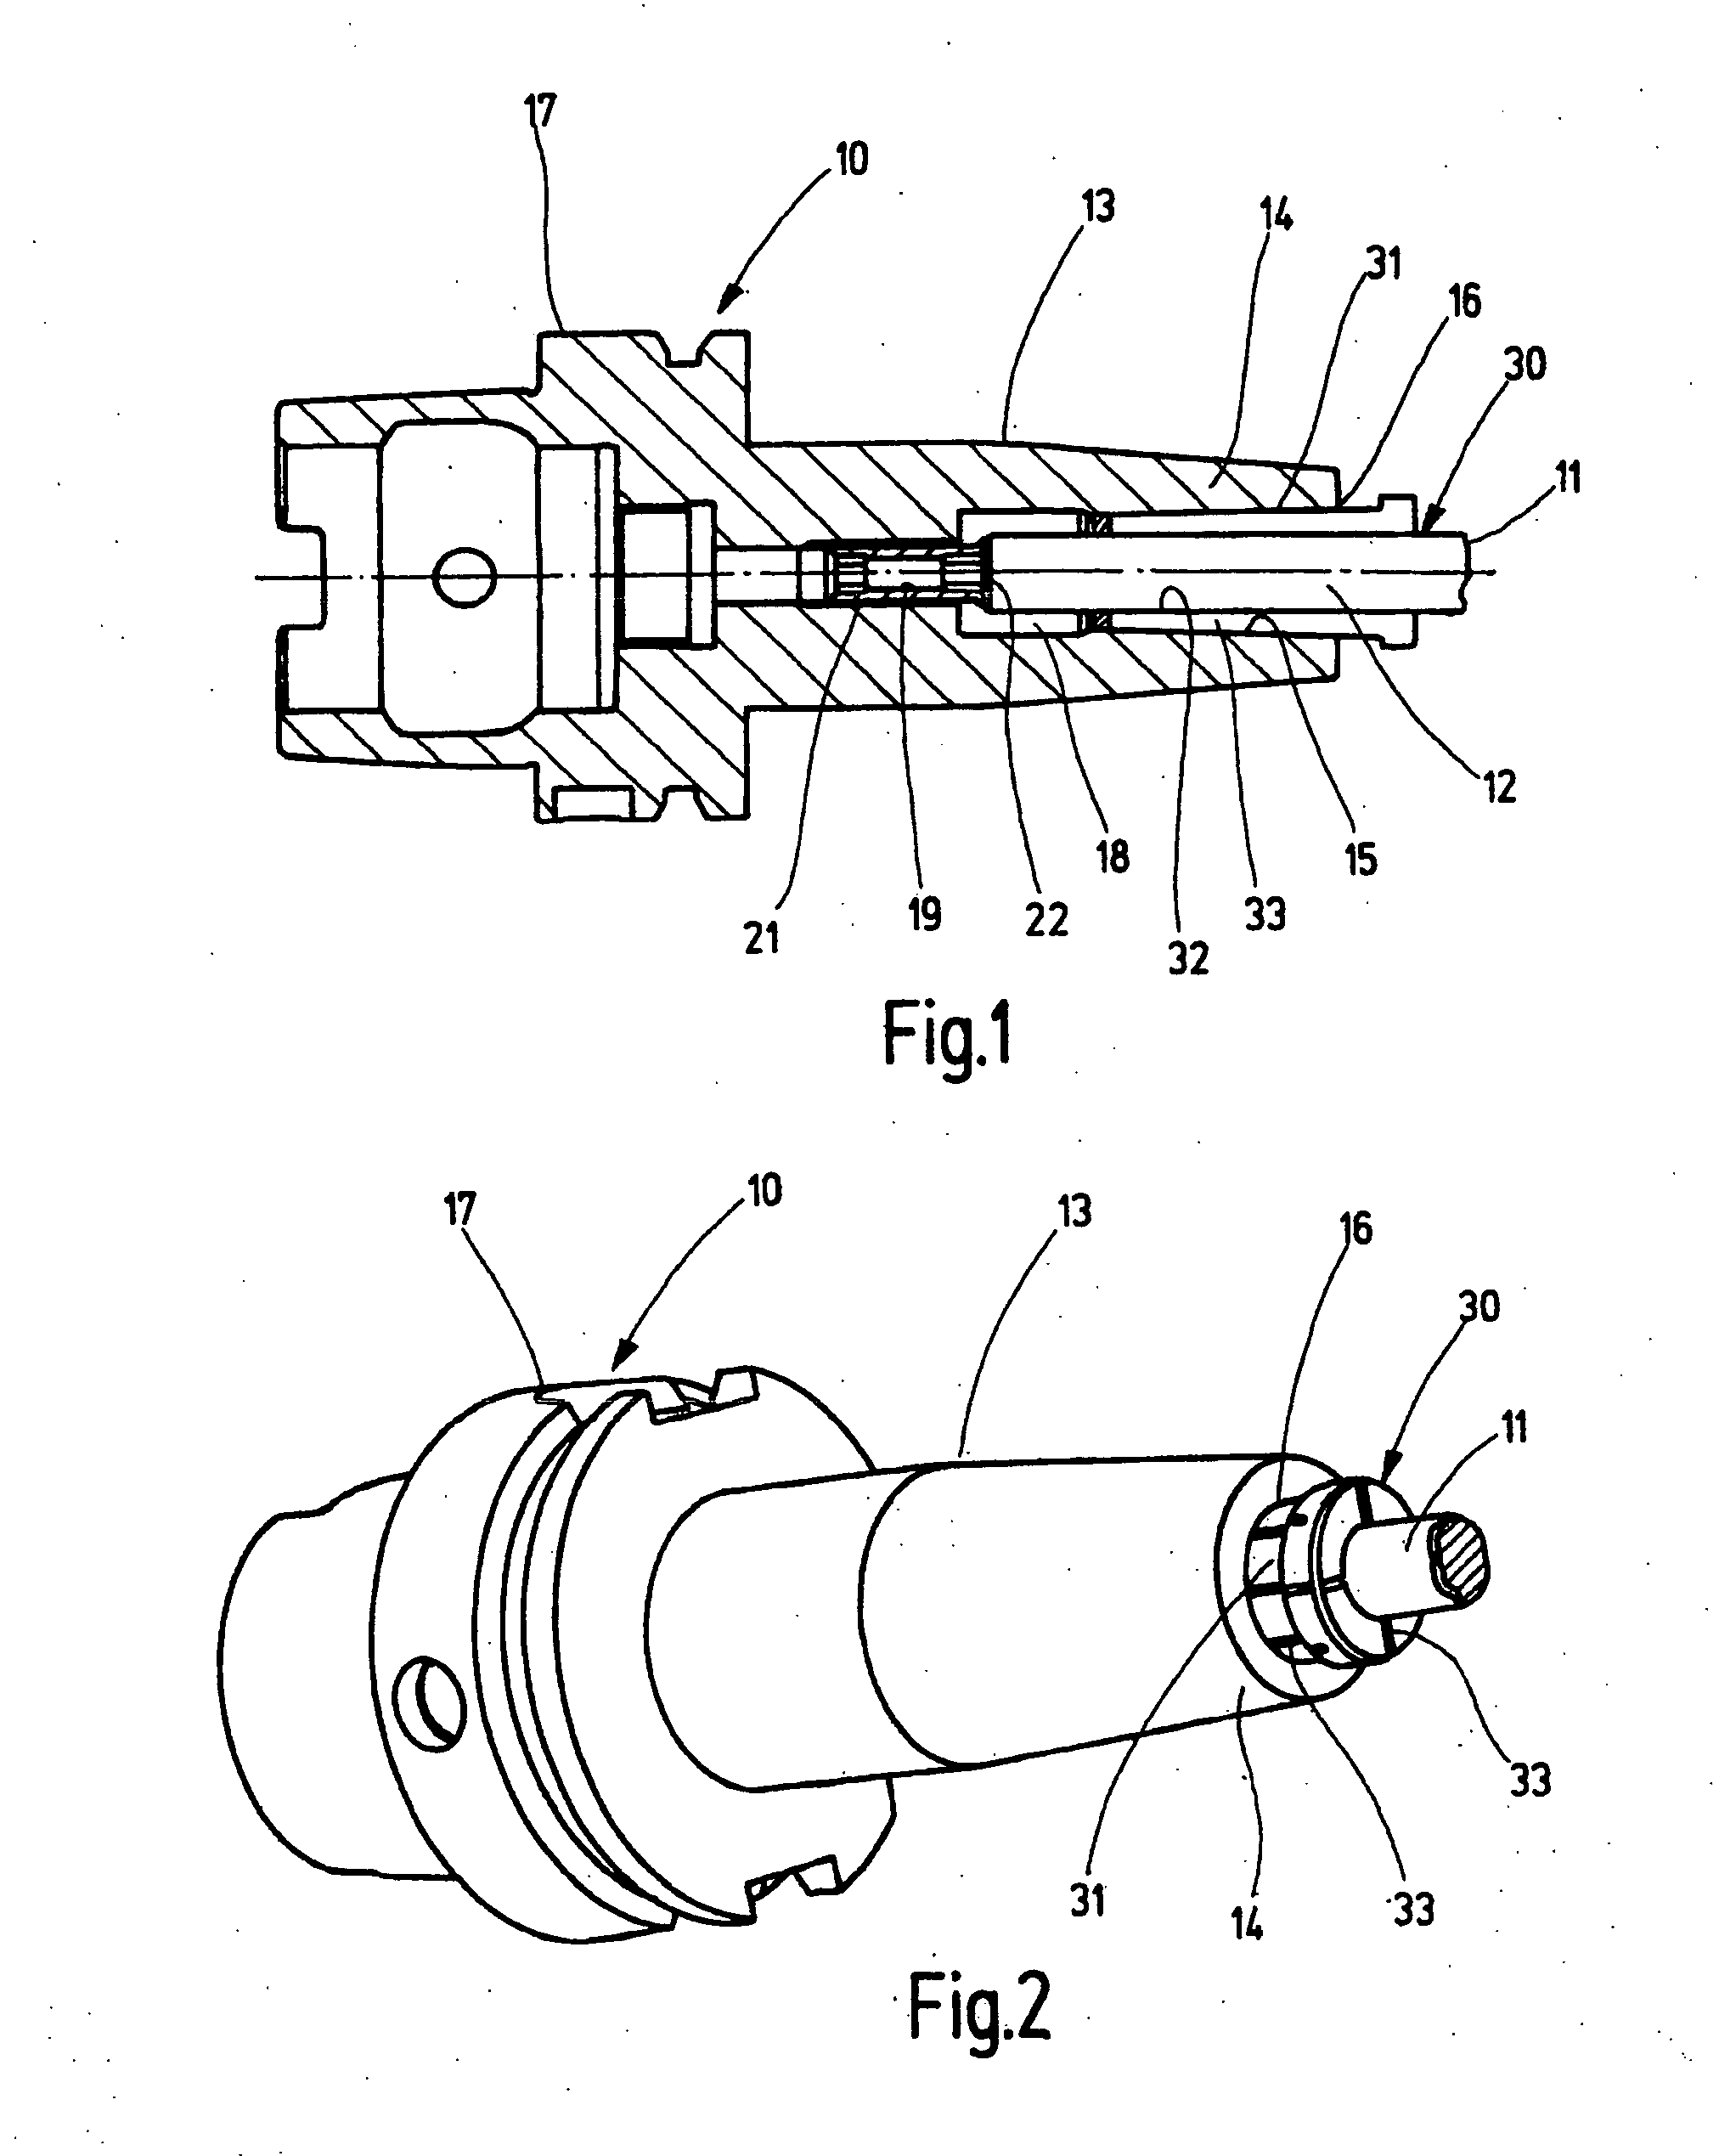 Tool holder for shrink-fit attachment of rotating tools with predominantly cylindrical shafts